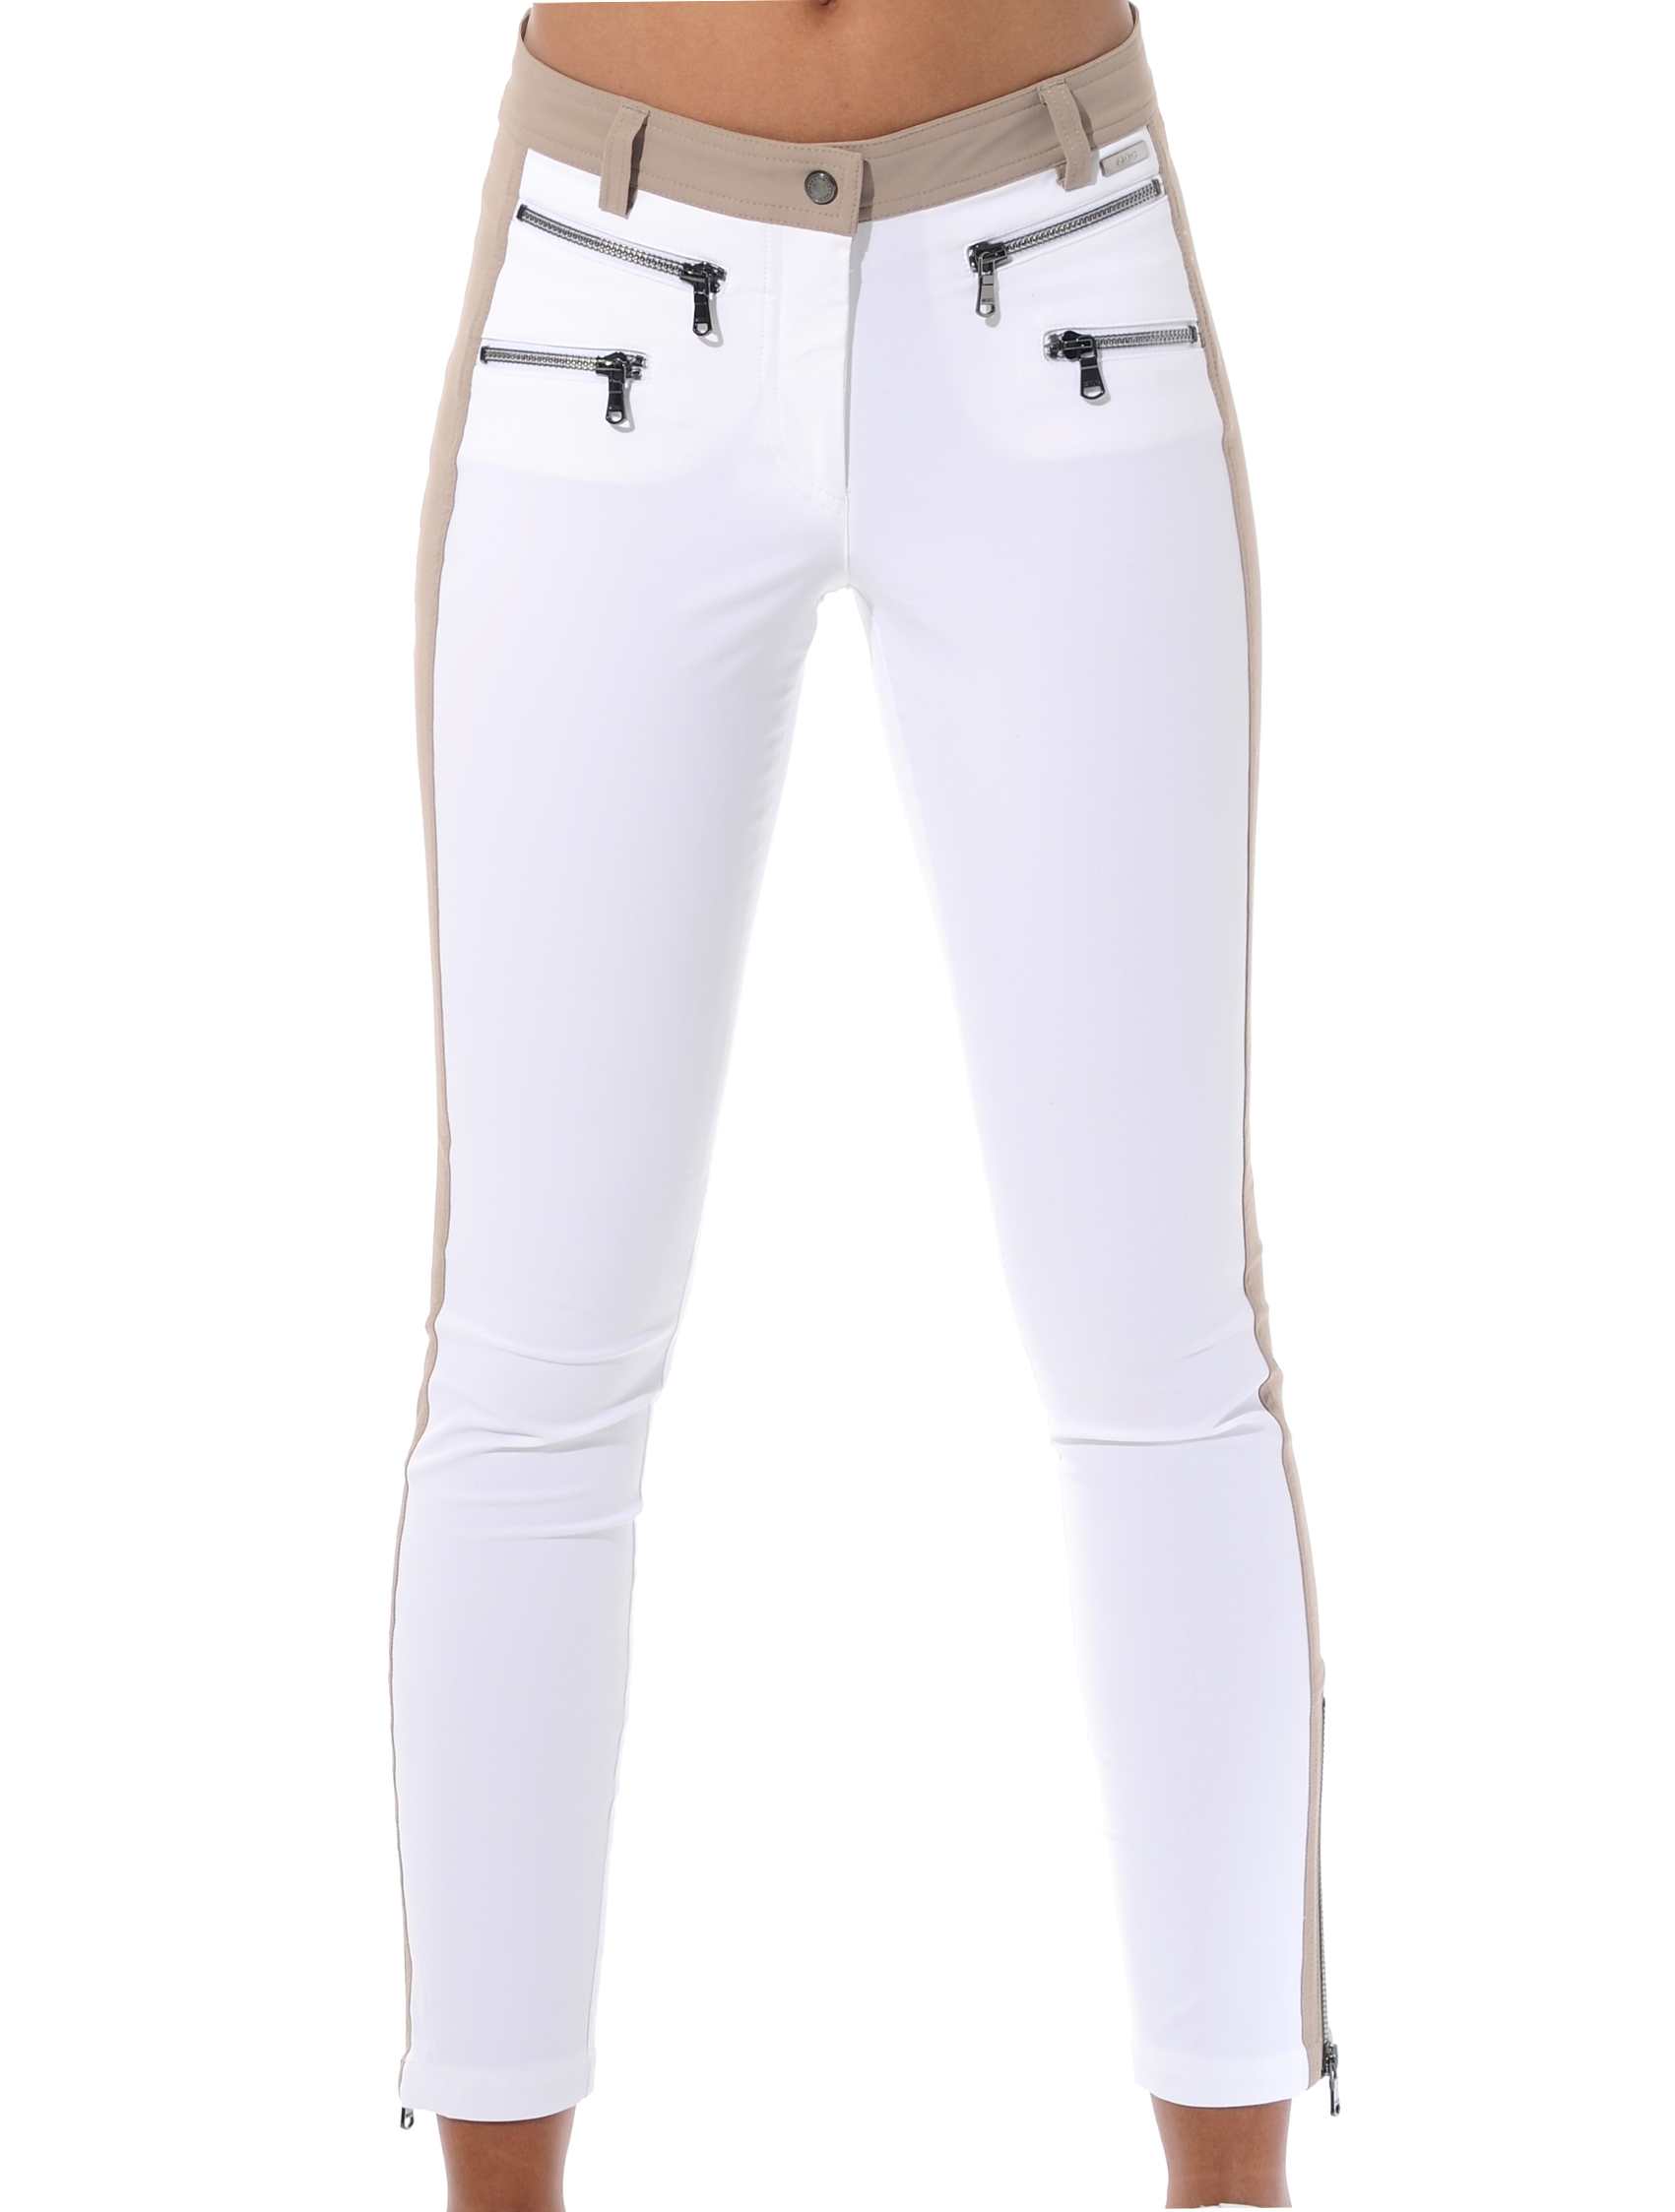 4way stretch double zip ankle pants white/taupe 